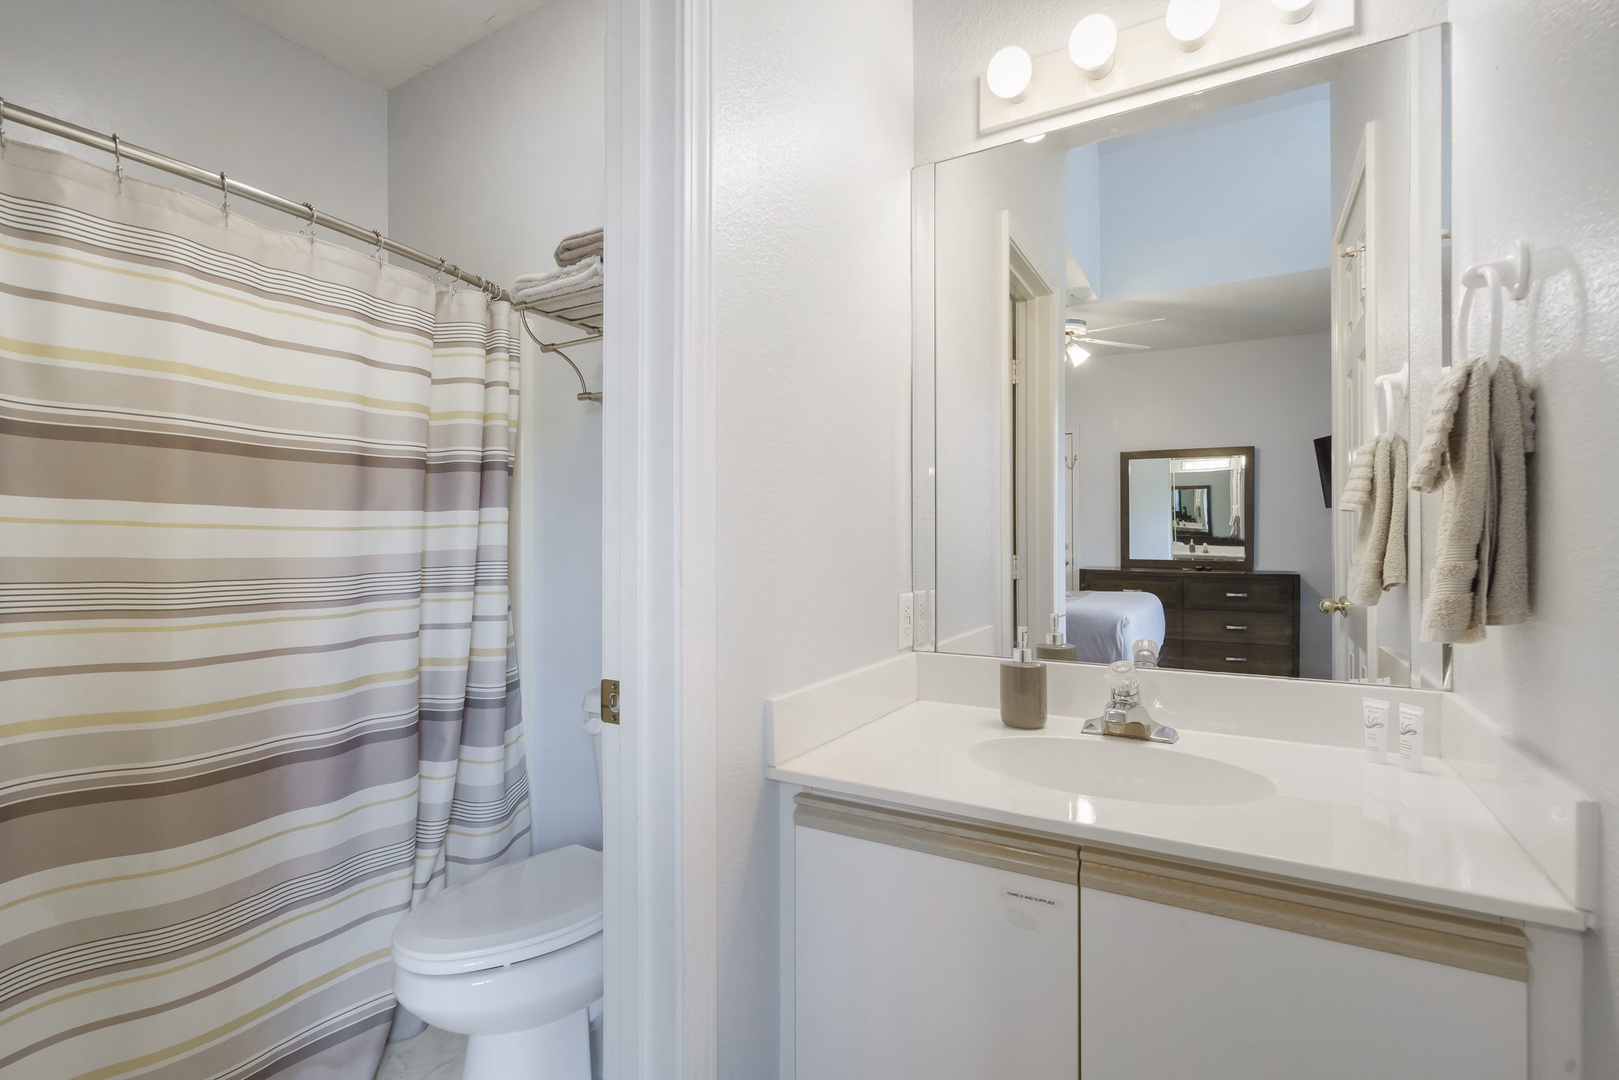 Unit 10 Bathroom with shower Tub Combo